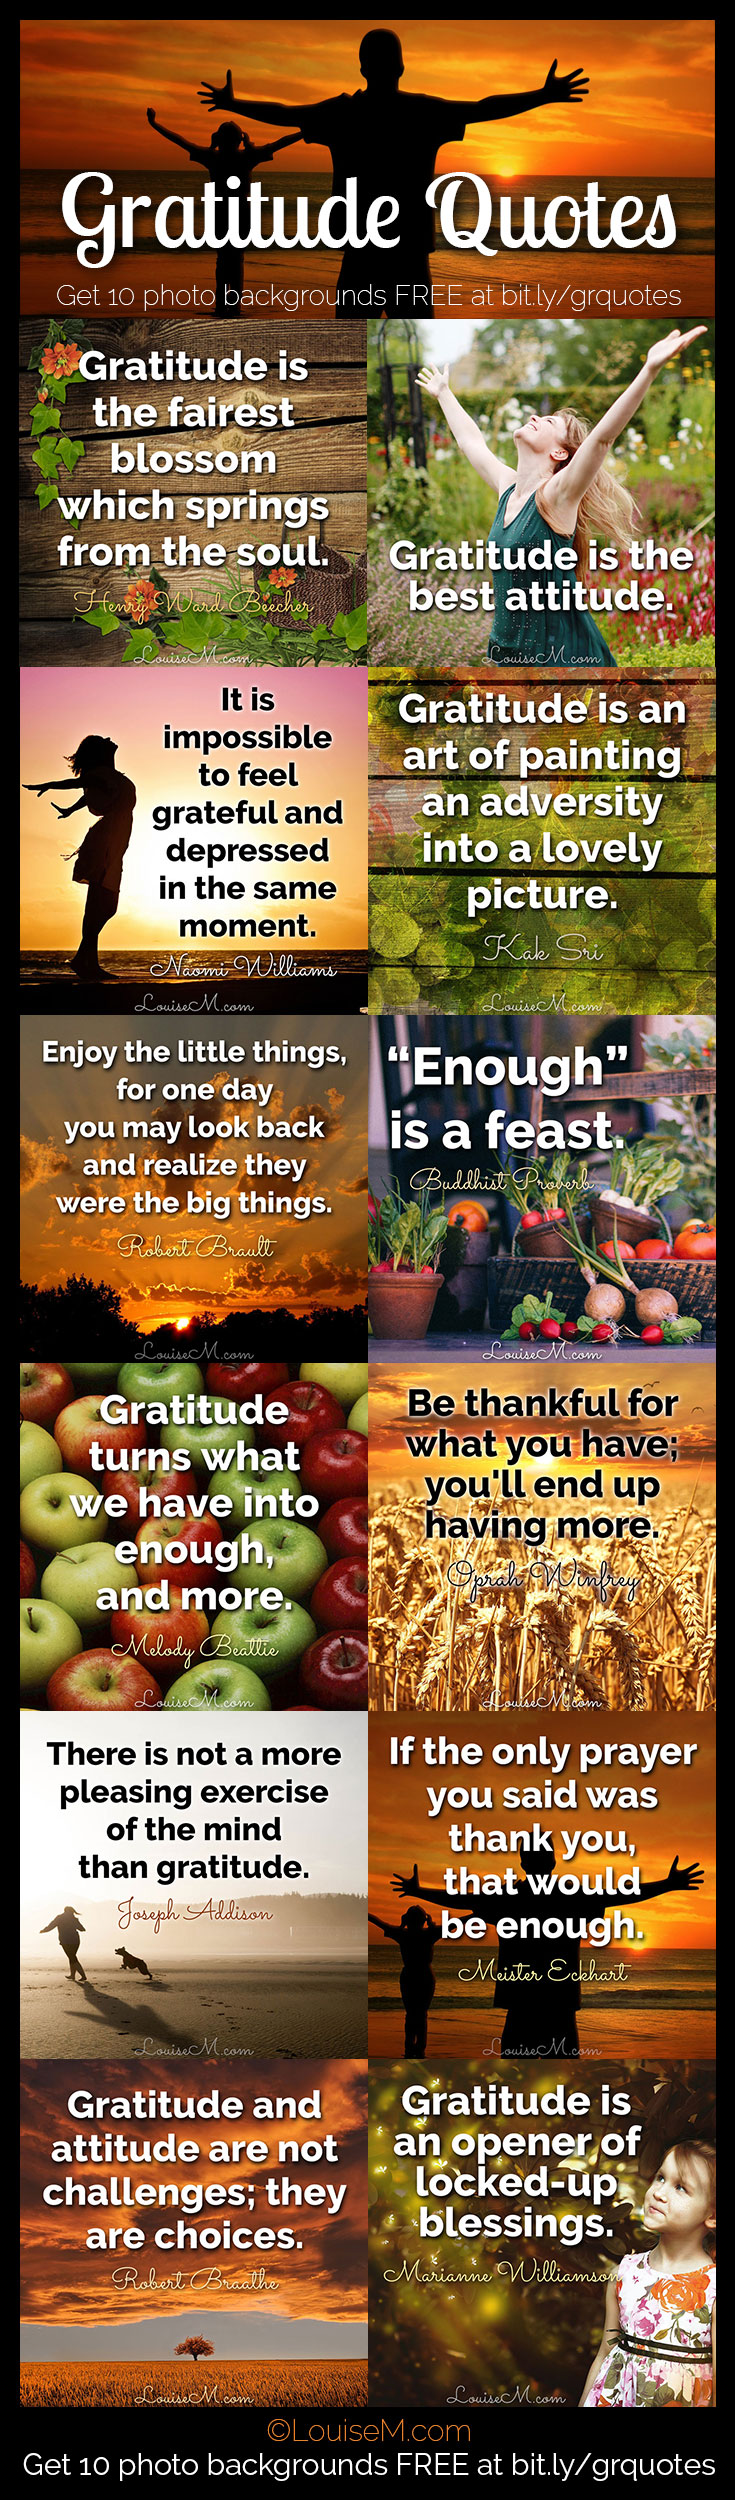 Find 30 days of gratitude quotes, photos, and more to help you adopt an attitude of gratitude. FREE photo download to make your own inspirational graphics! 